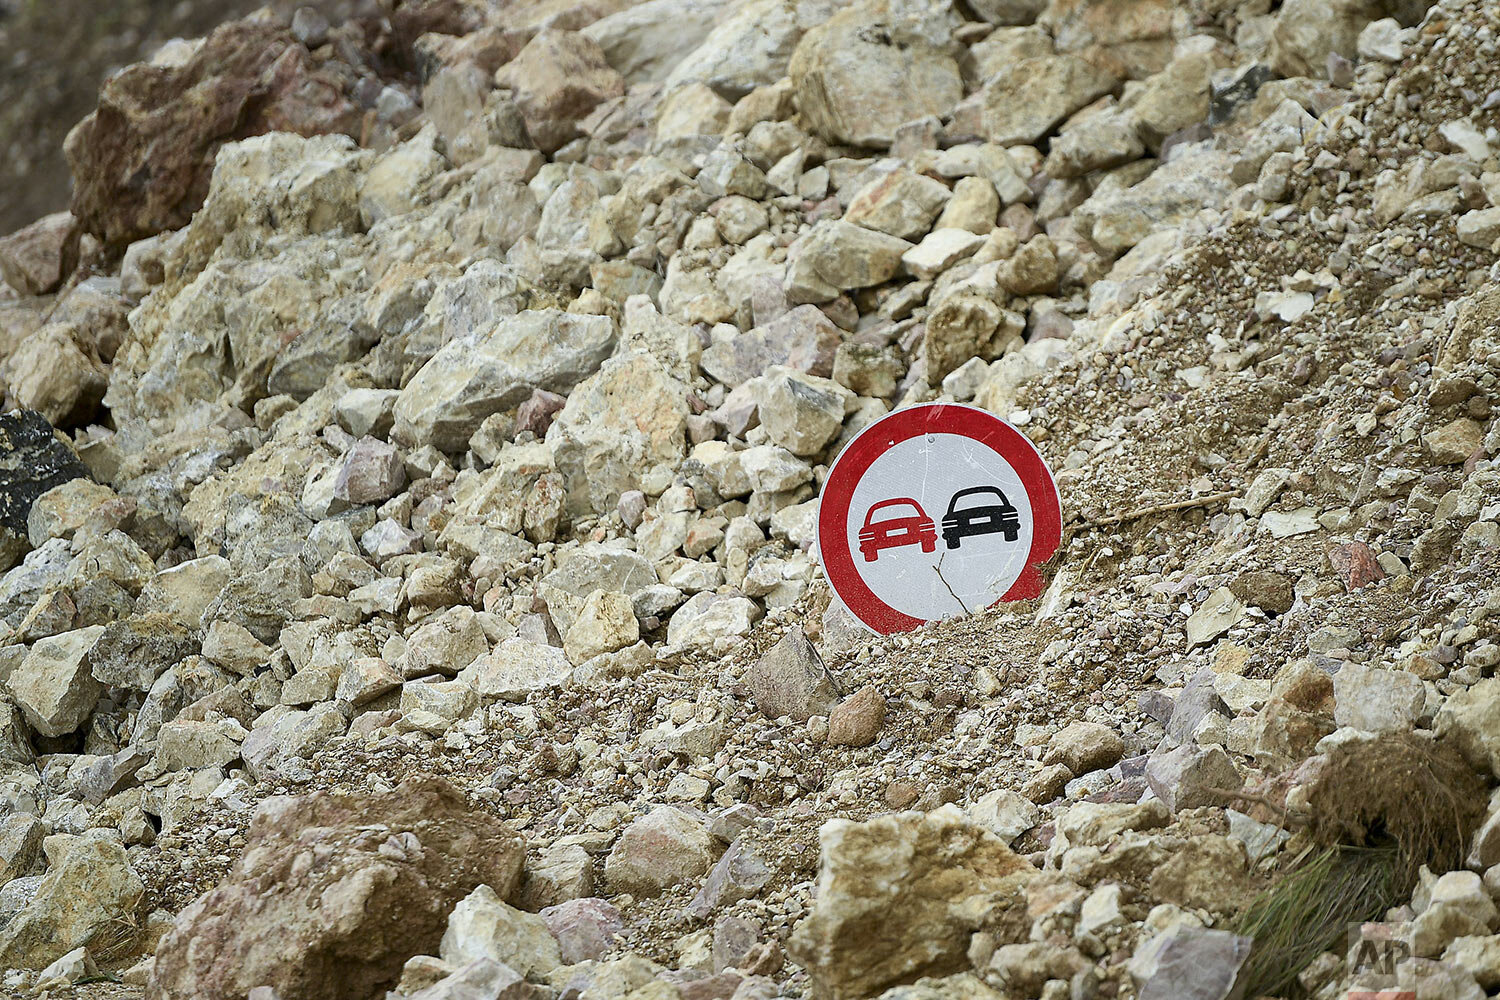  A traffic sign pokes out from the debris of a landslide triggered by a 7.2 magnitude earthquake, alongside a road in Rampe, Haiti, Aug. 18, 2021. (AP Photo/Matias Delacroix) 